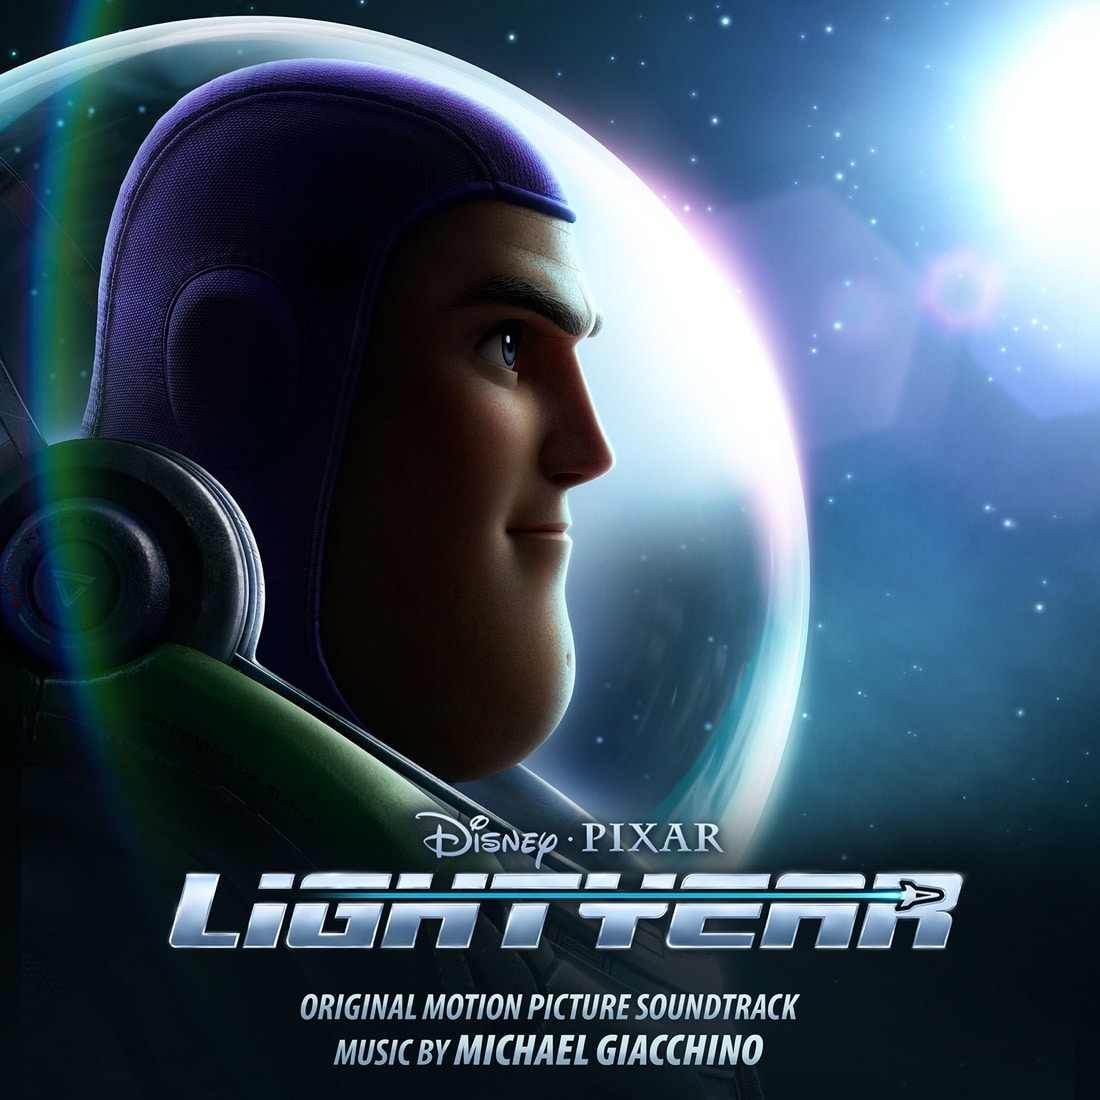 ICYMI: Mission Perpetual Released Ahead of Lightyear Premiere